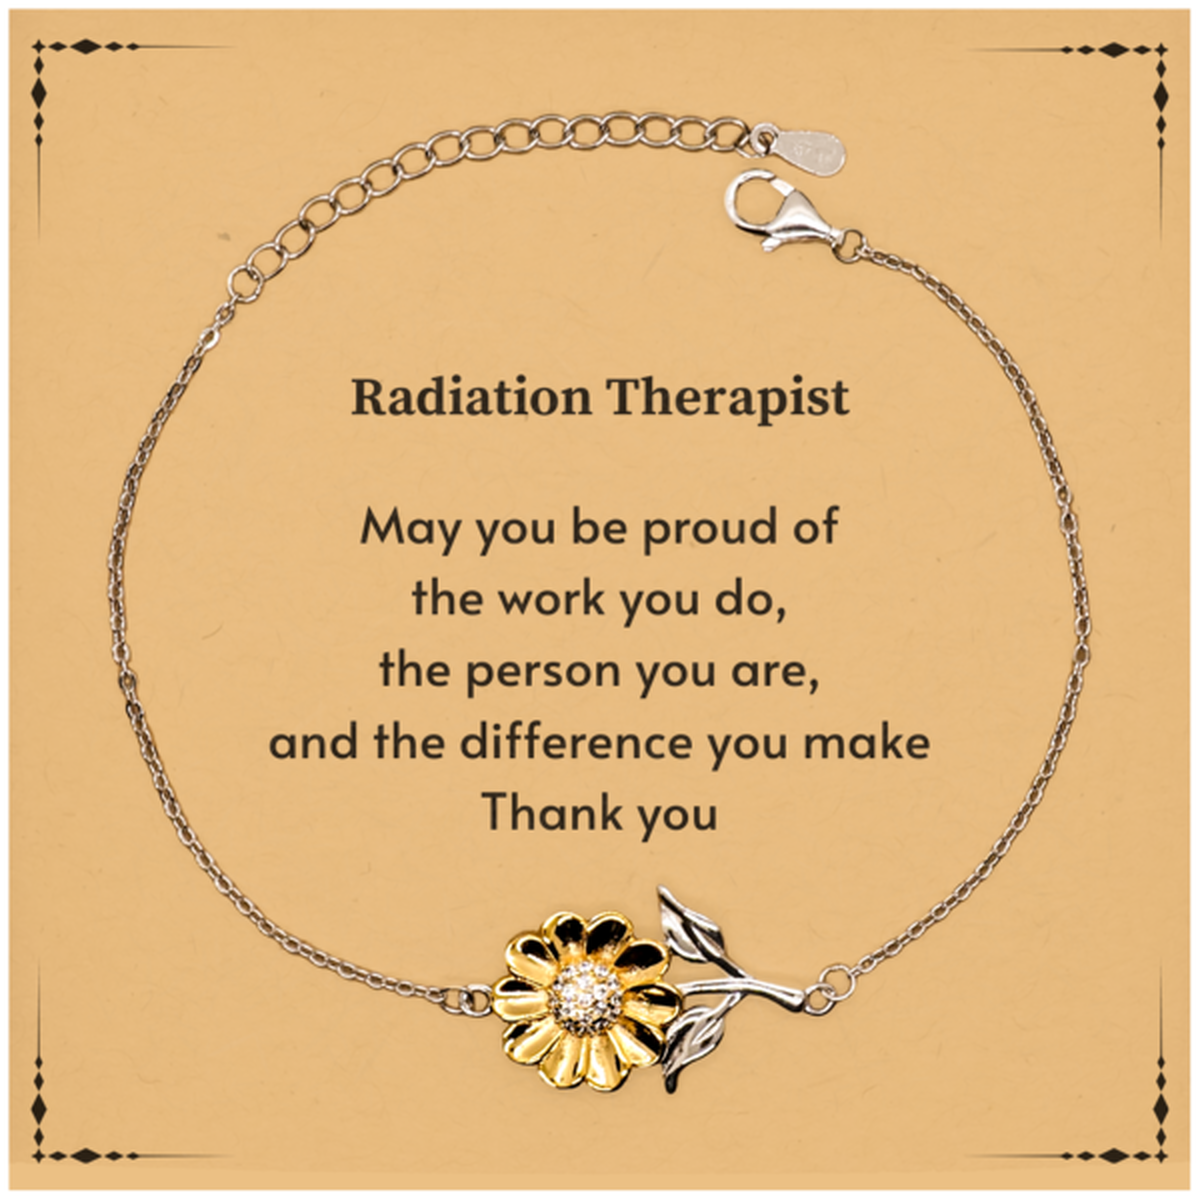 Heartwarming Sunflower Bracelet Retirement Coworkers Gifts for Radiation Therapist, Radiation Therapist May You be proud of the work you do, the person you are Gifts for Boss Men Women Friends